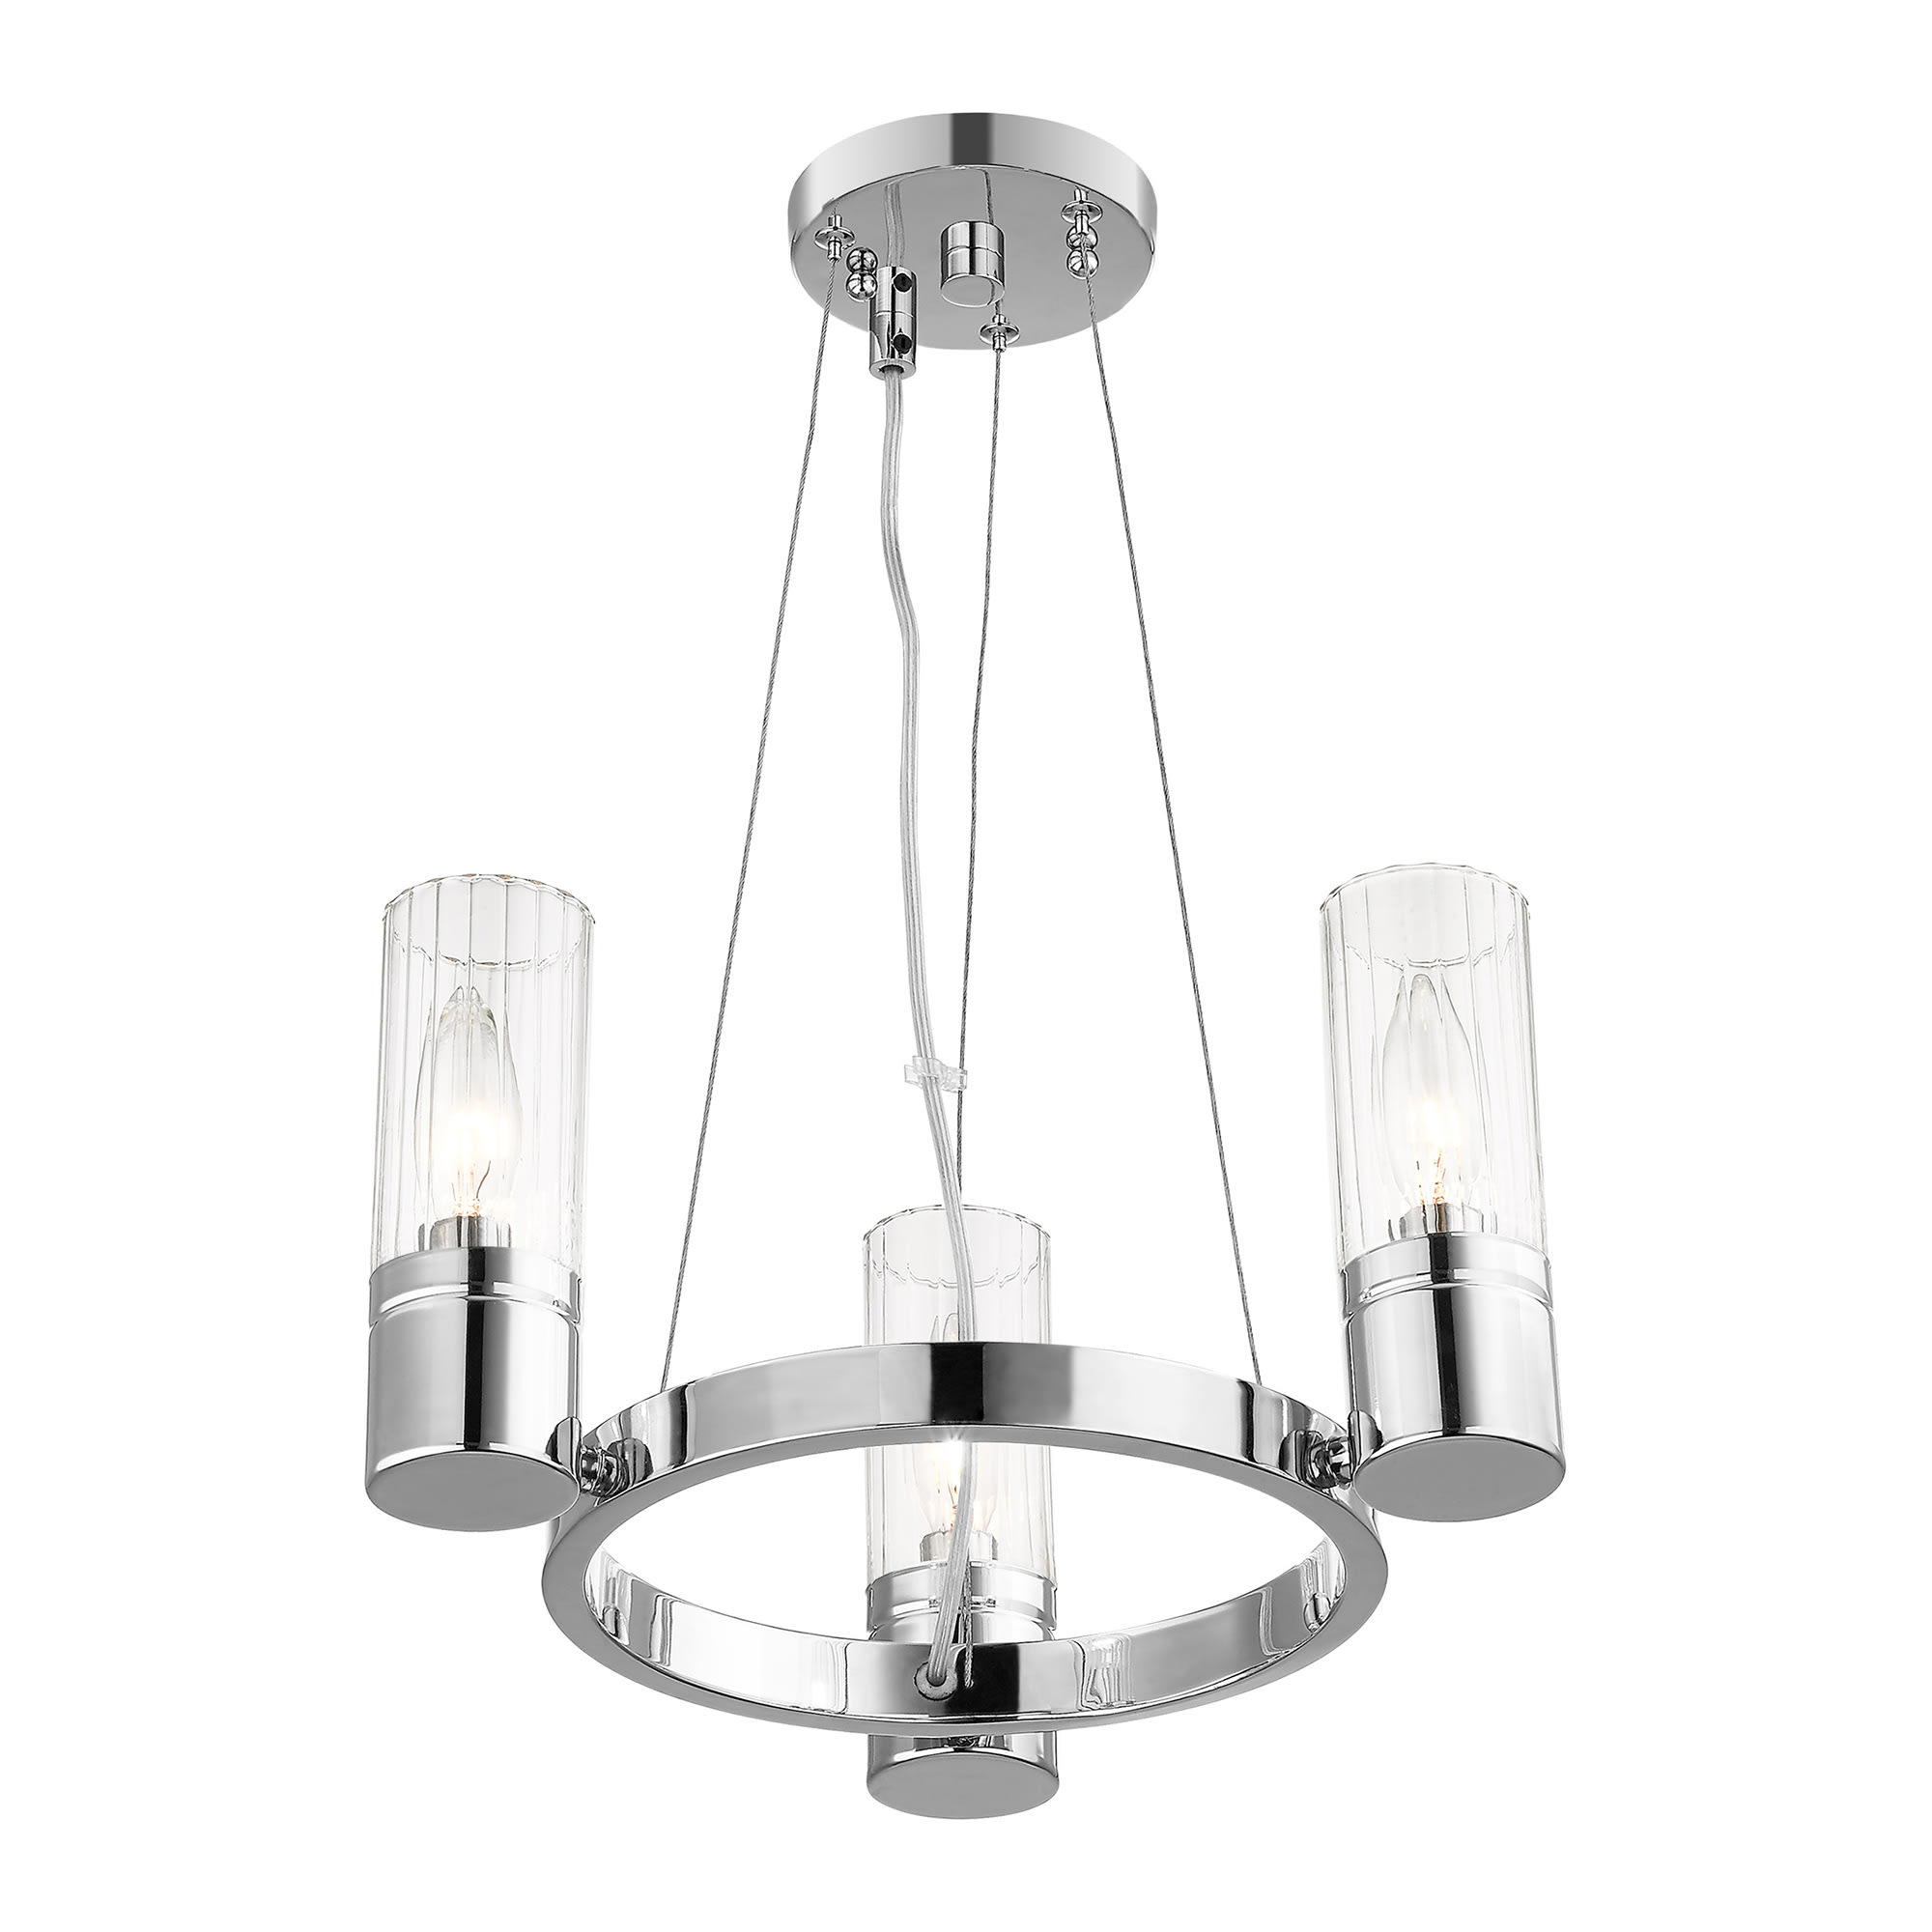 Polished Chrome Livex Lighting 50693-05 Transitional Three Light Mini Chandelier from Midtown Collection Finish 